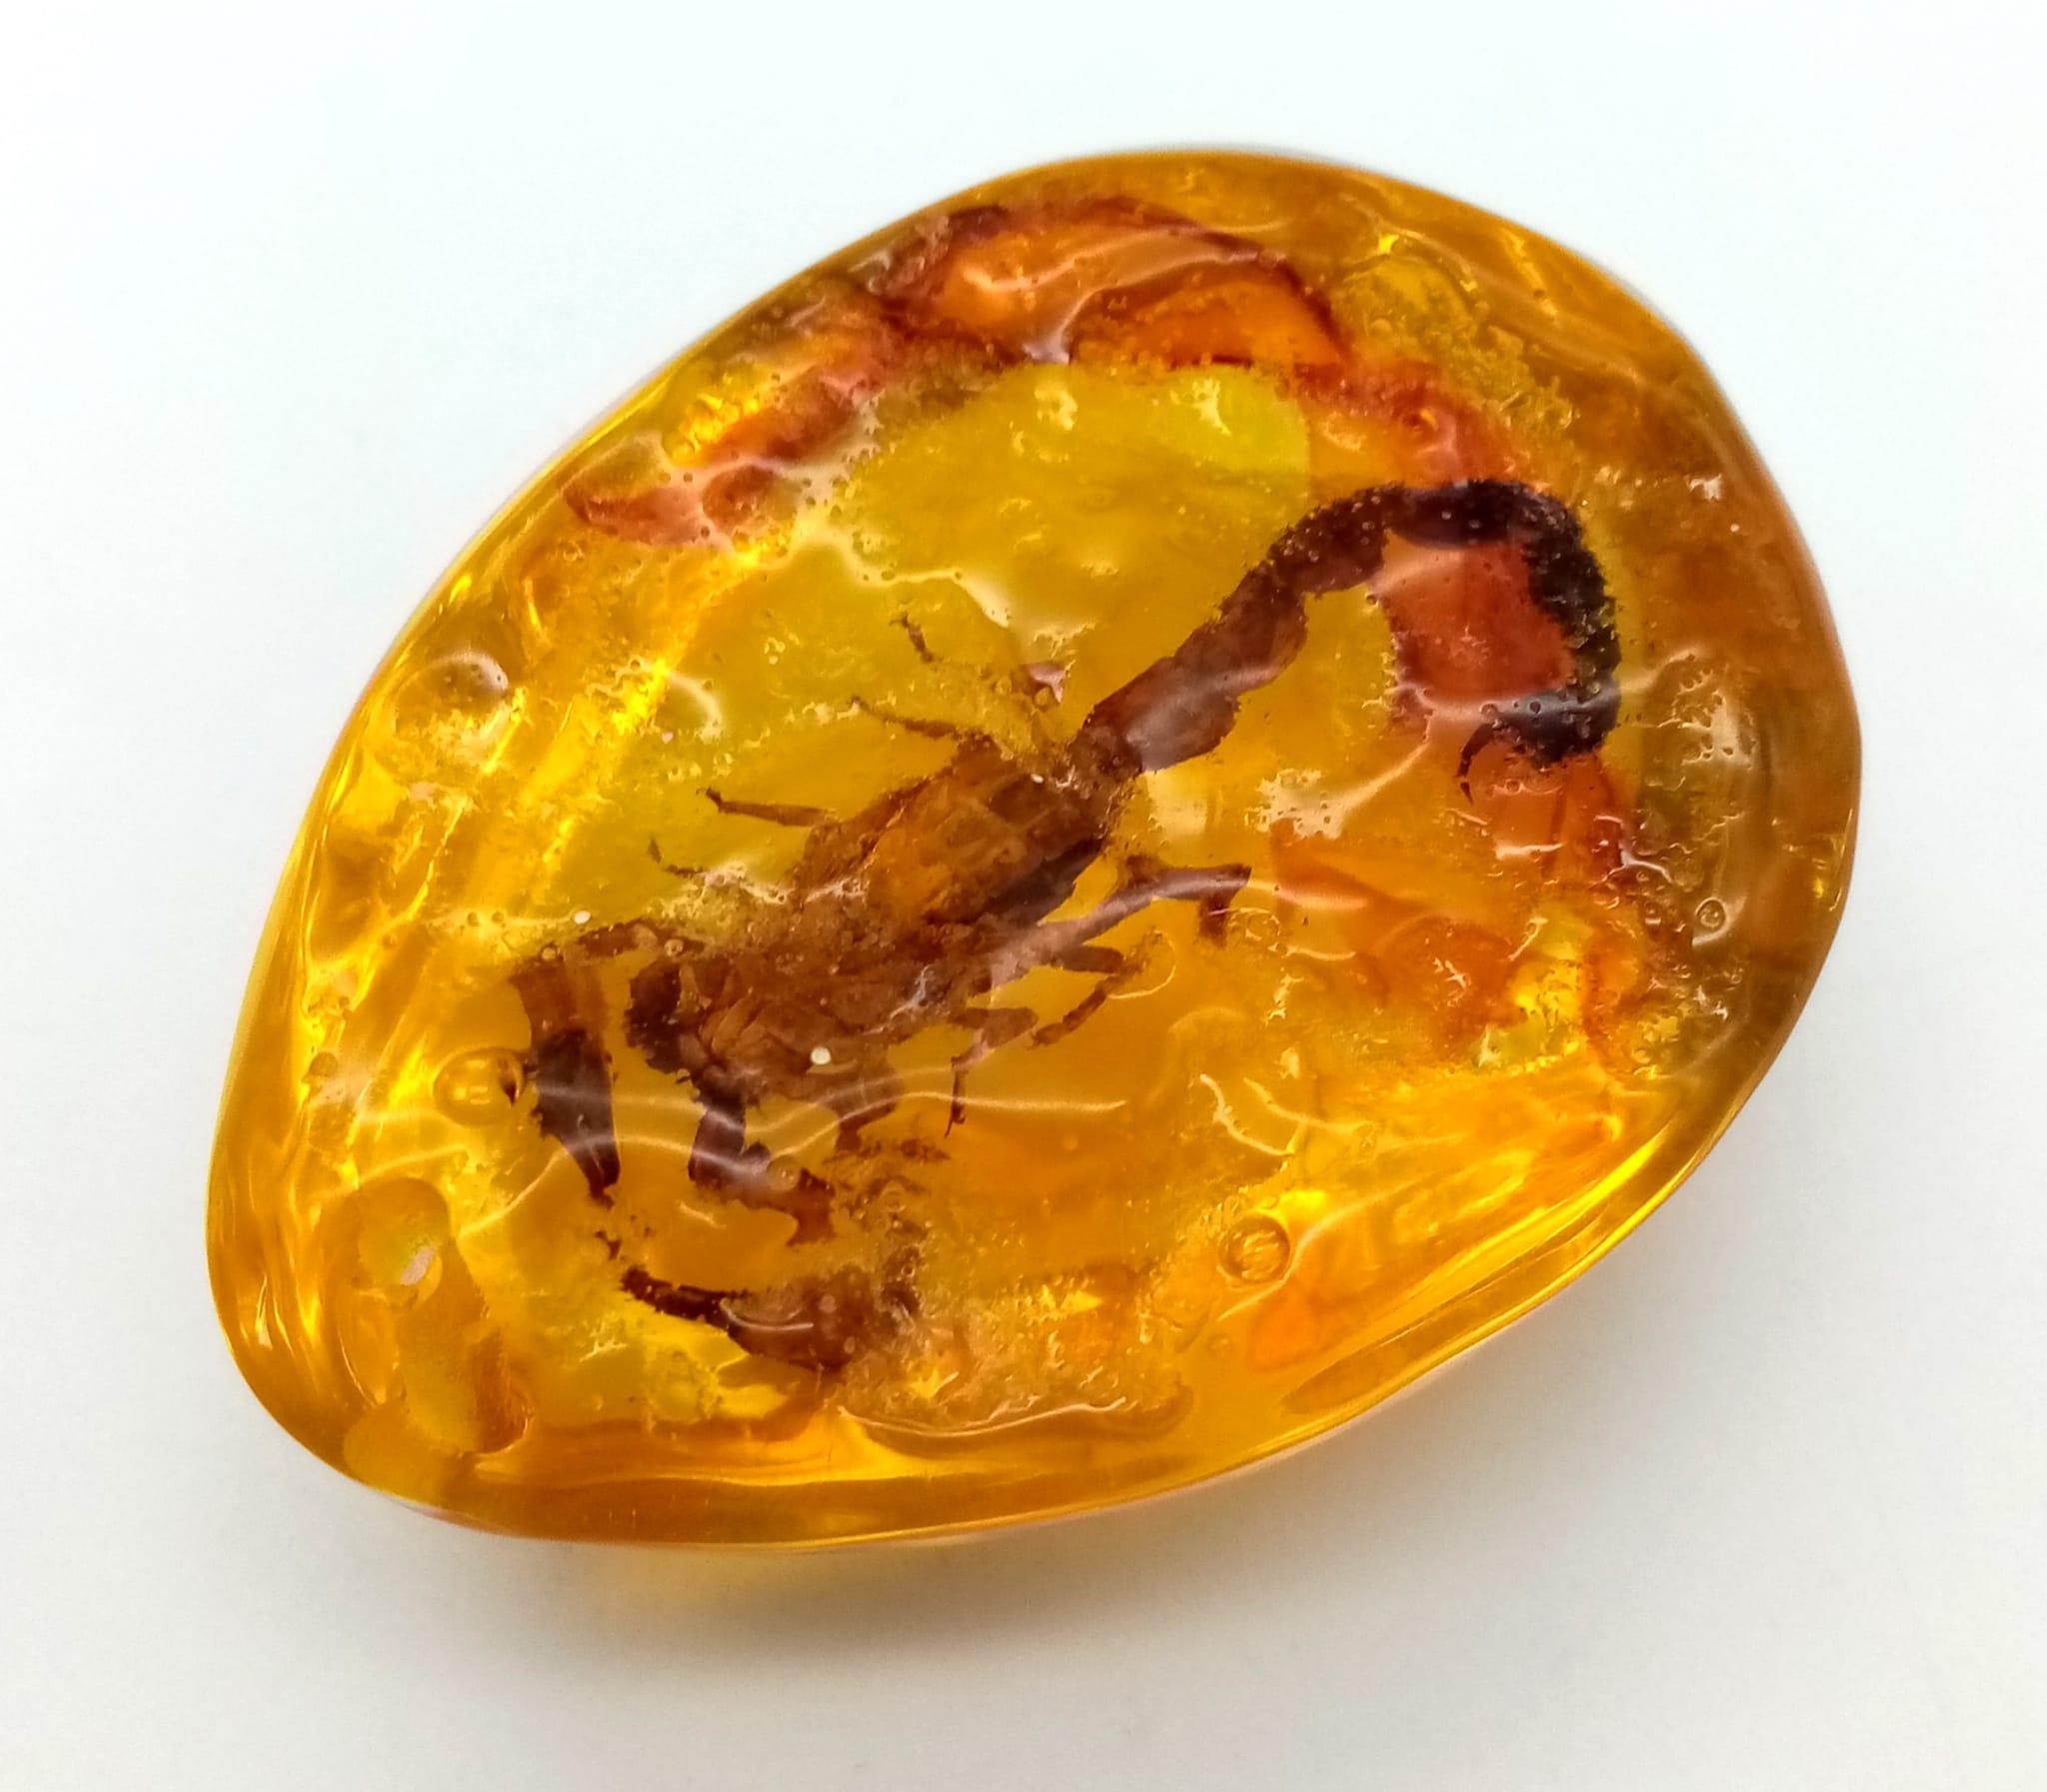 A Ruthless Looking Scorpion Trapped in An Amber Coloured Resin. Pendant or paperweight. 6cm. - Image 3 of 3